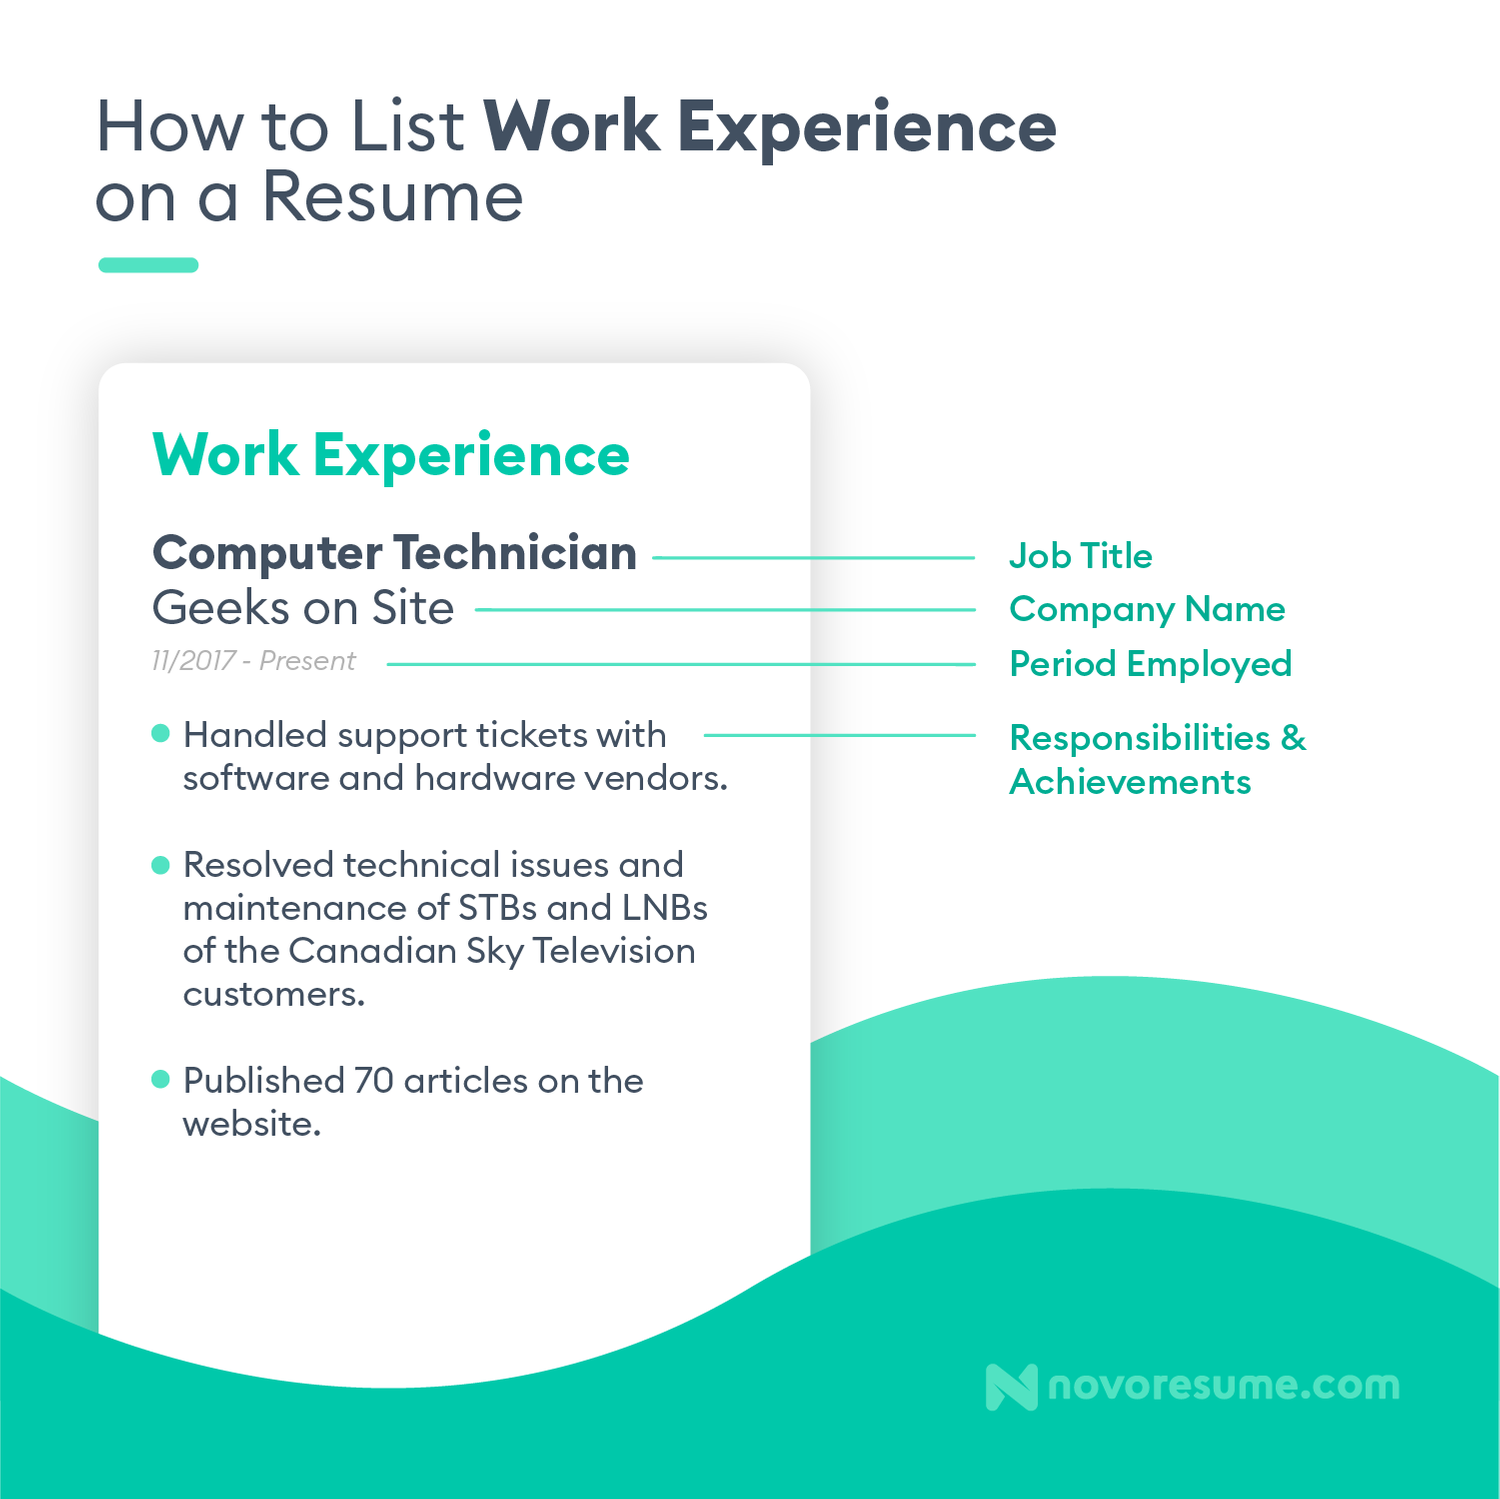 listing work experience on a resume